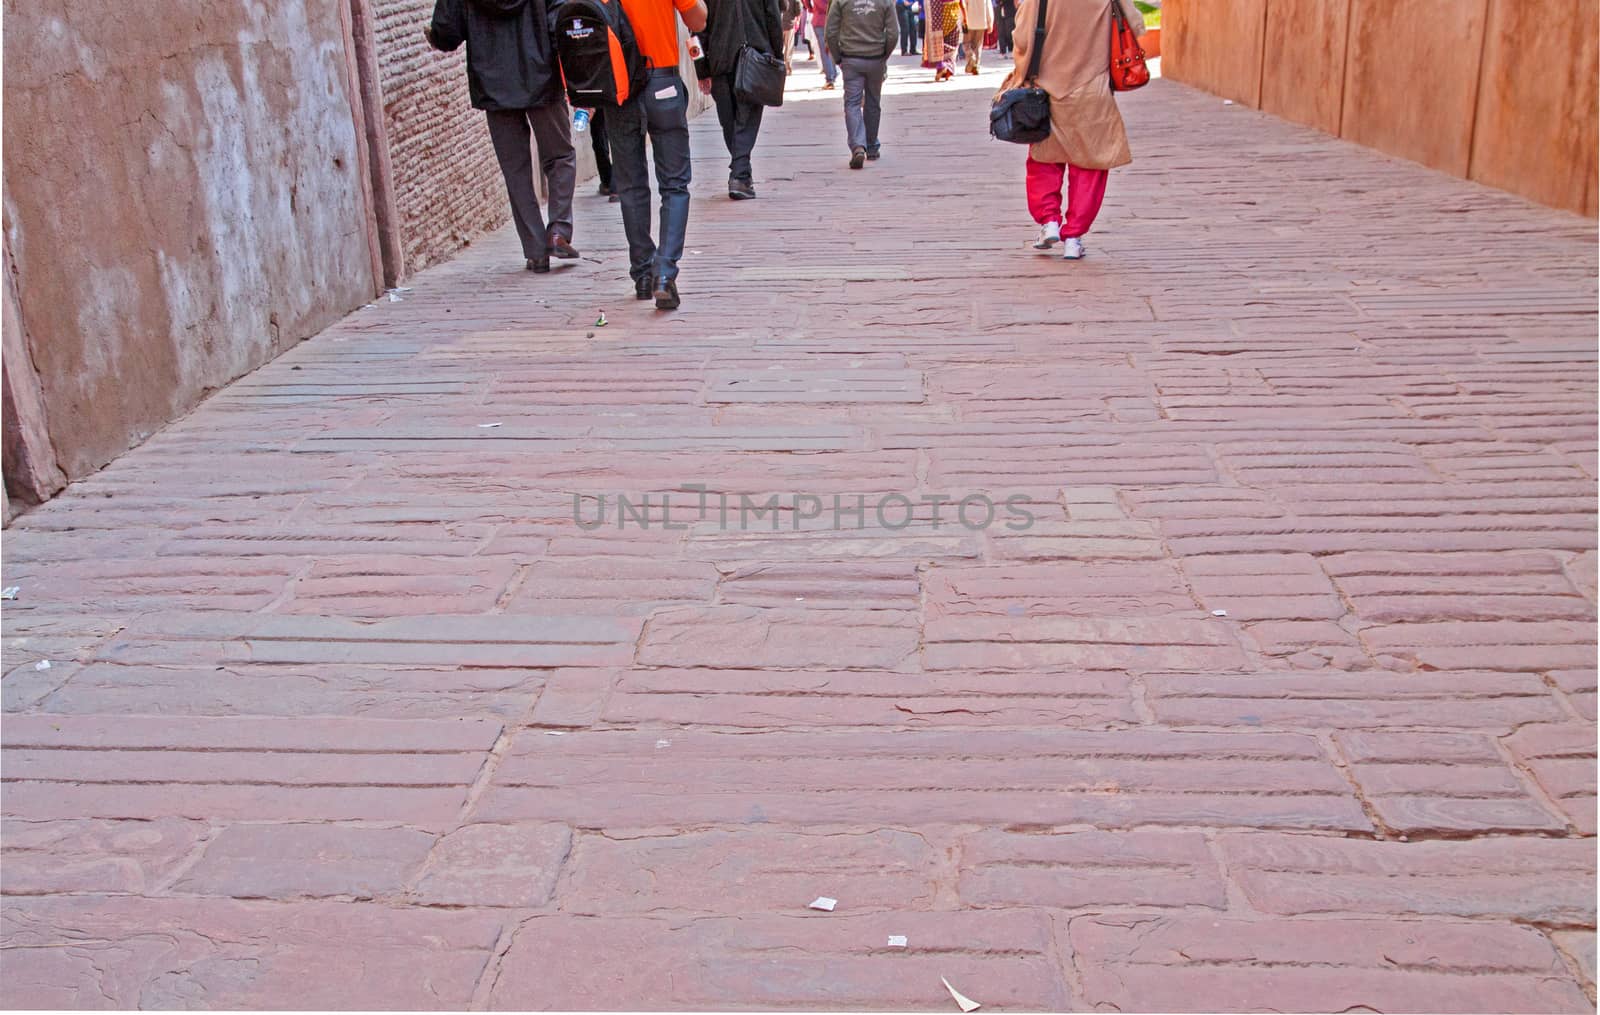 Paved tiled path enclosed by high walls with group of people walking away showing them from behind